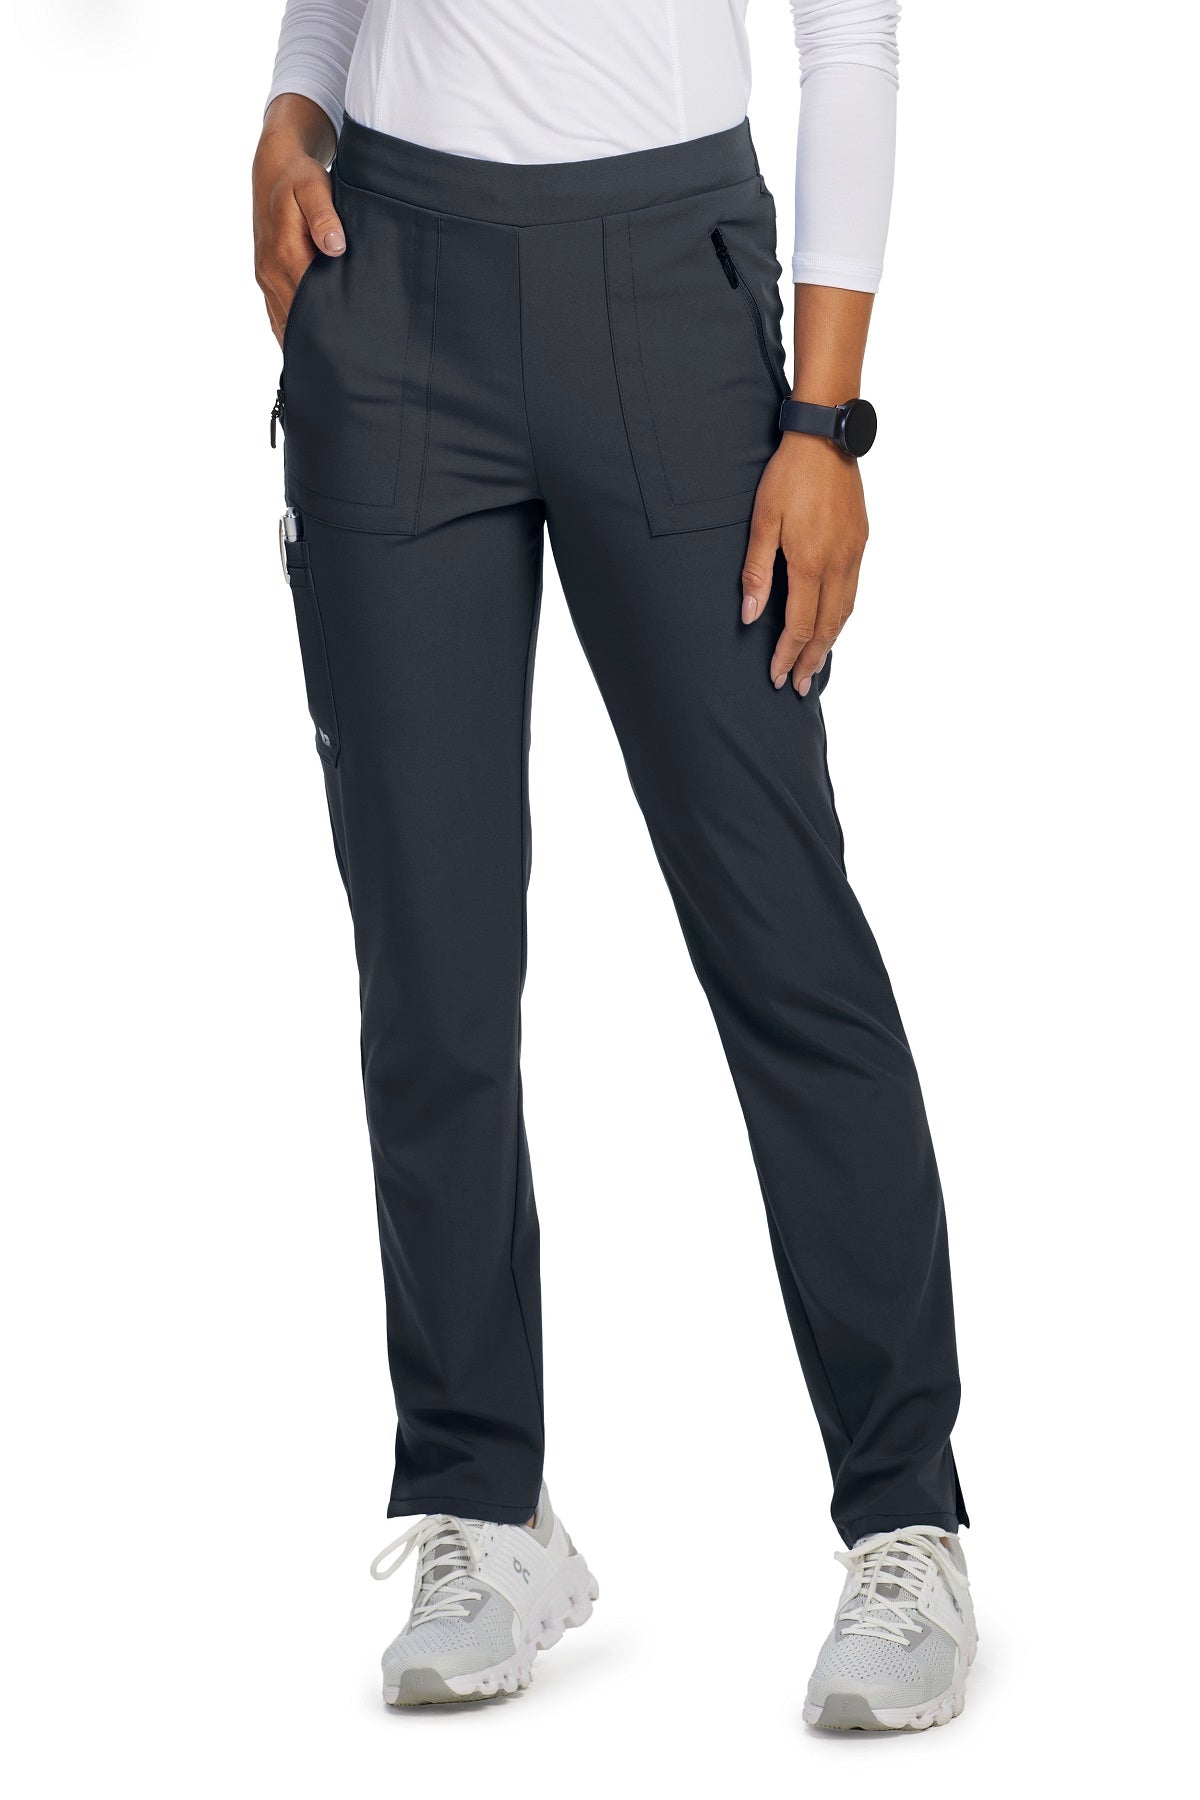 Barco Unify Scrub Pants Purpose 5 Pocket in Steel at Parker's Clothing and Shoes.